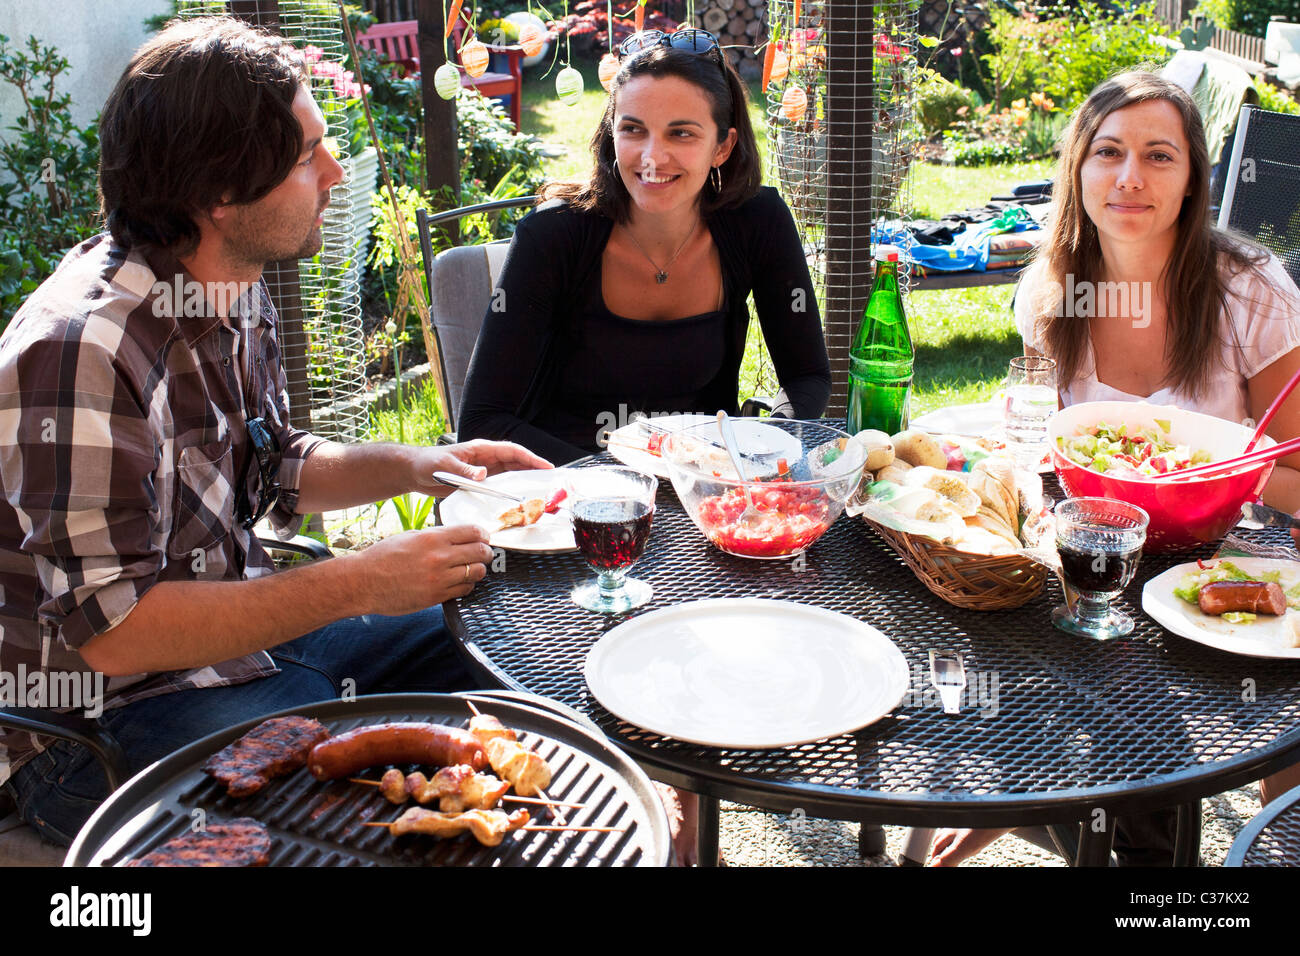 Barbecue party in the garden Stock Photo